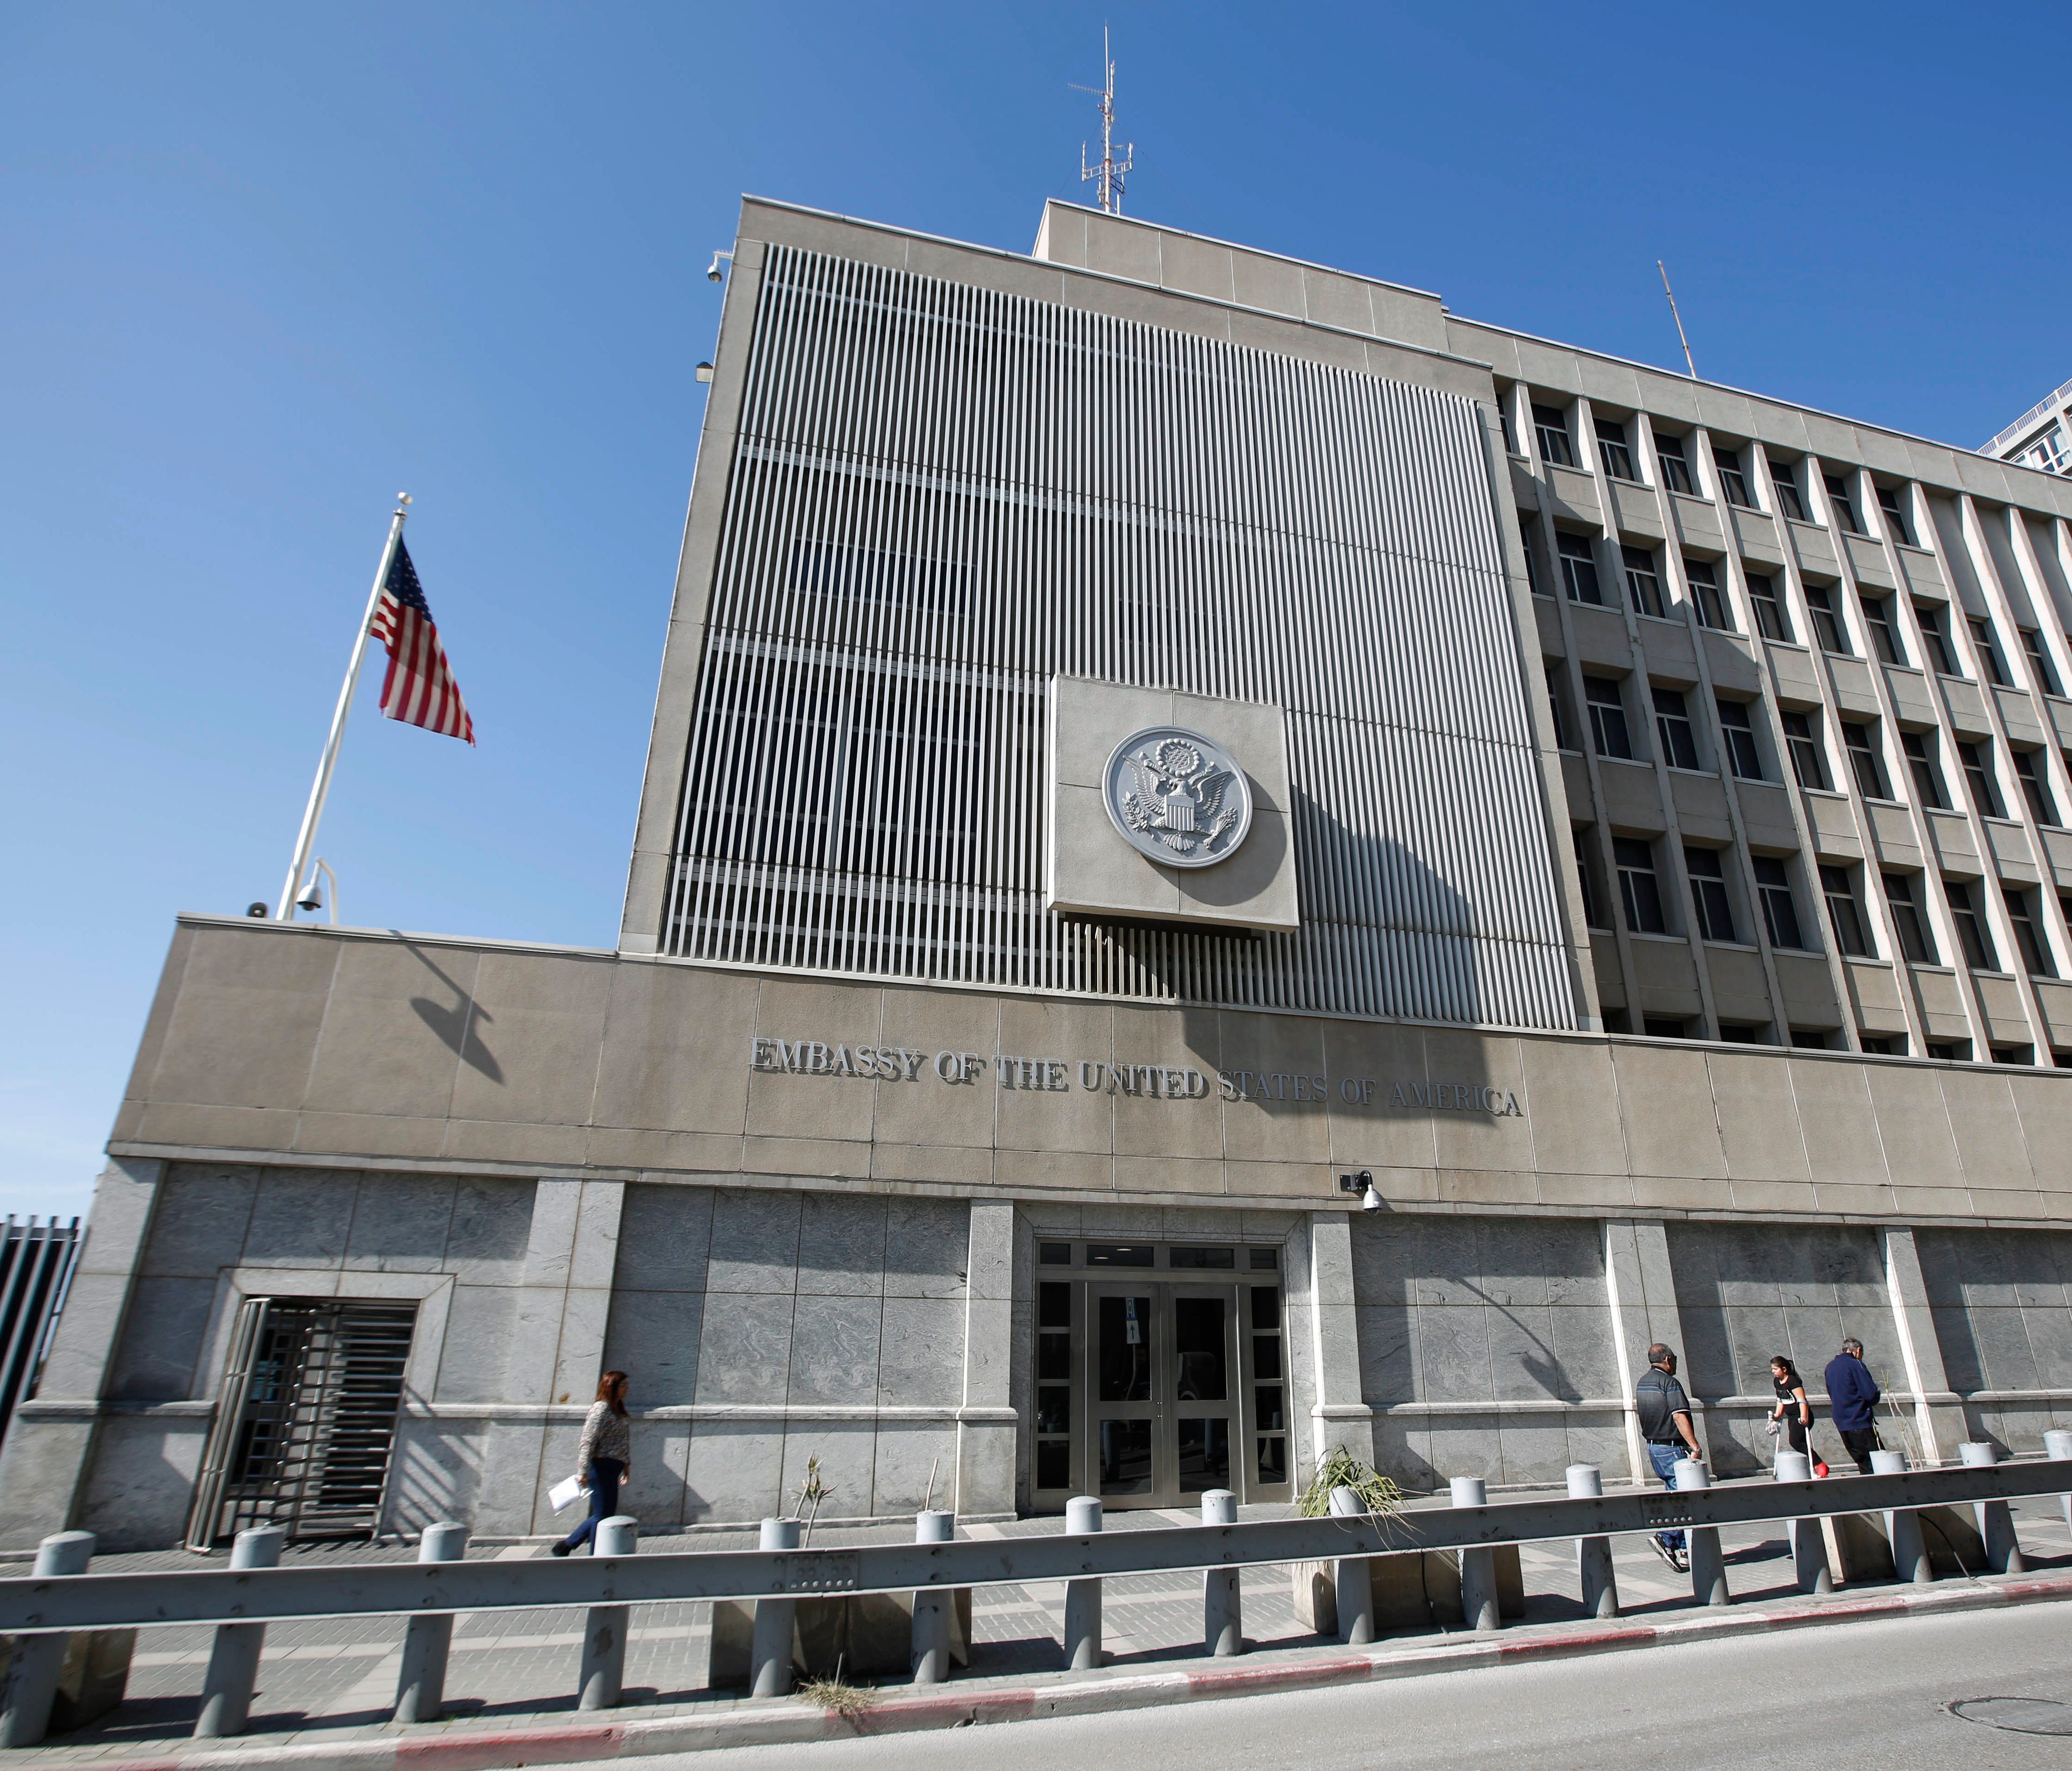 An exterior view on the U.S. Embassy in Tel Aviv, Israel.